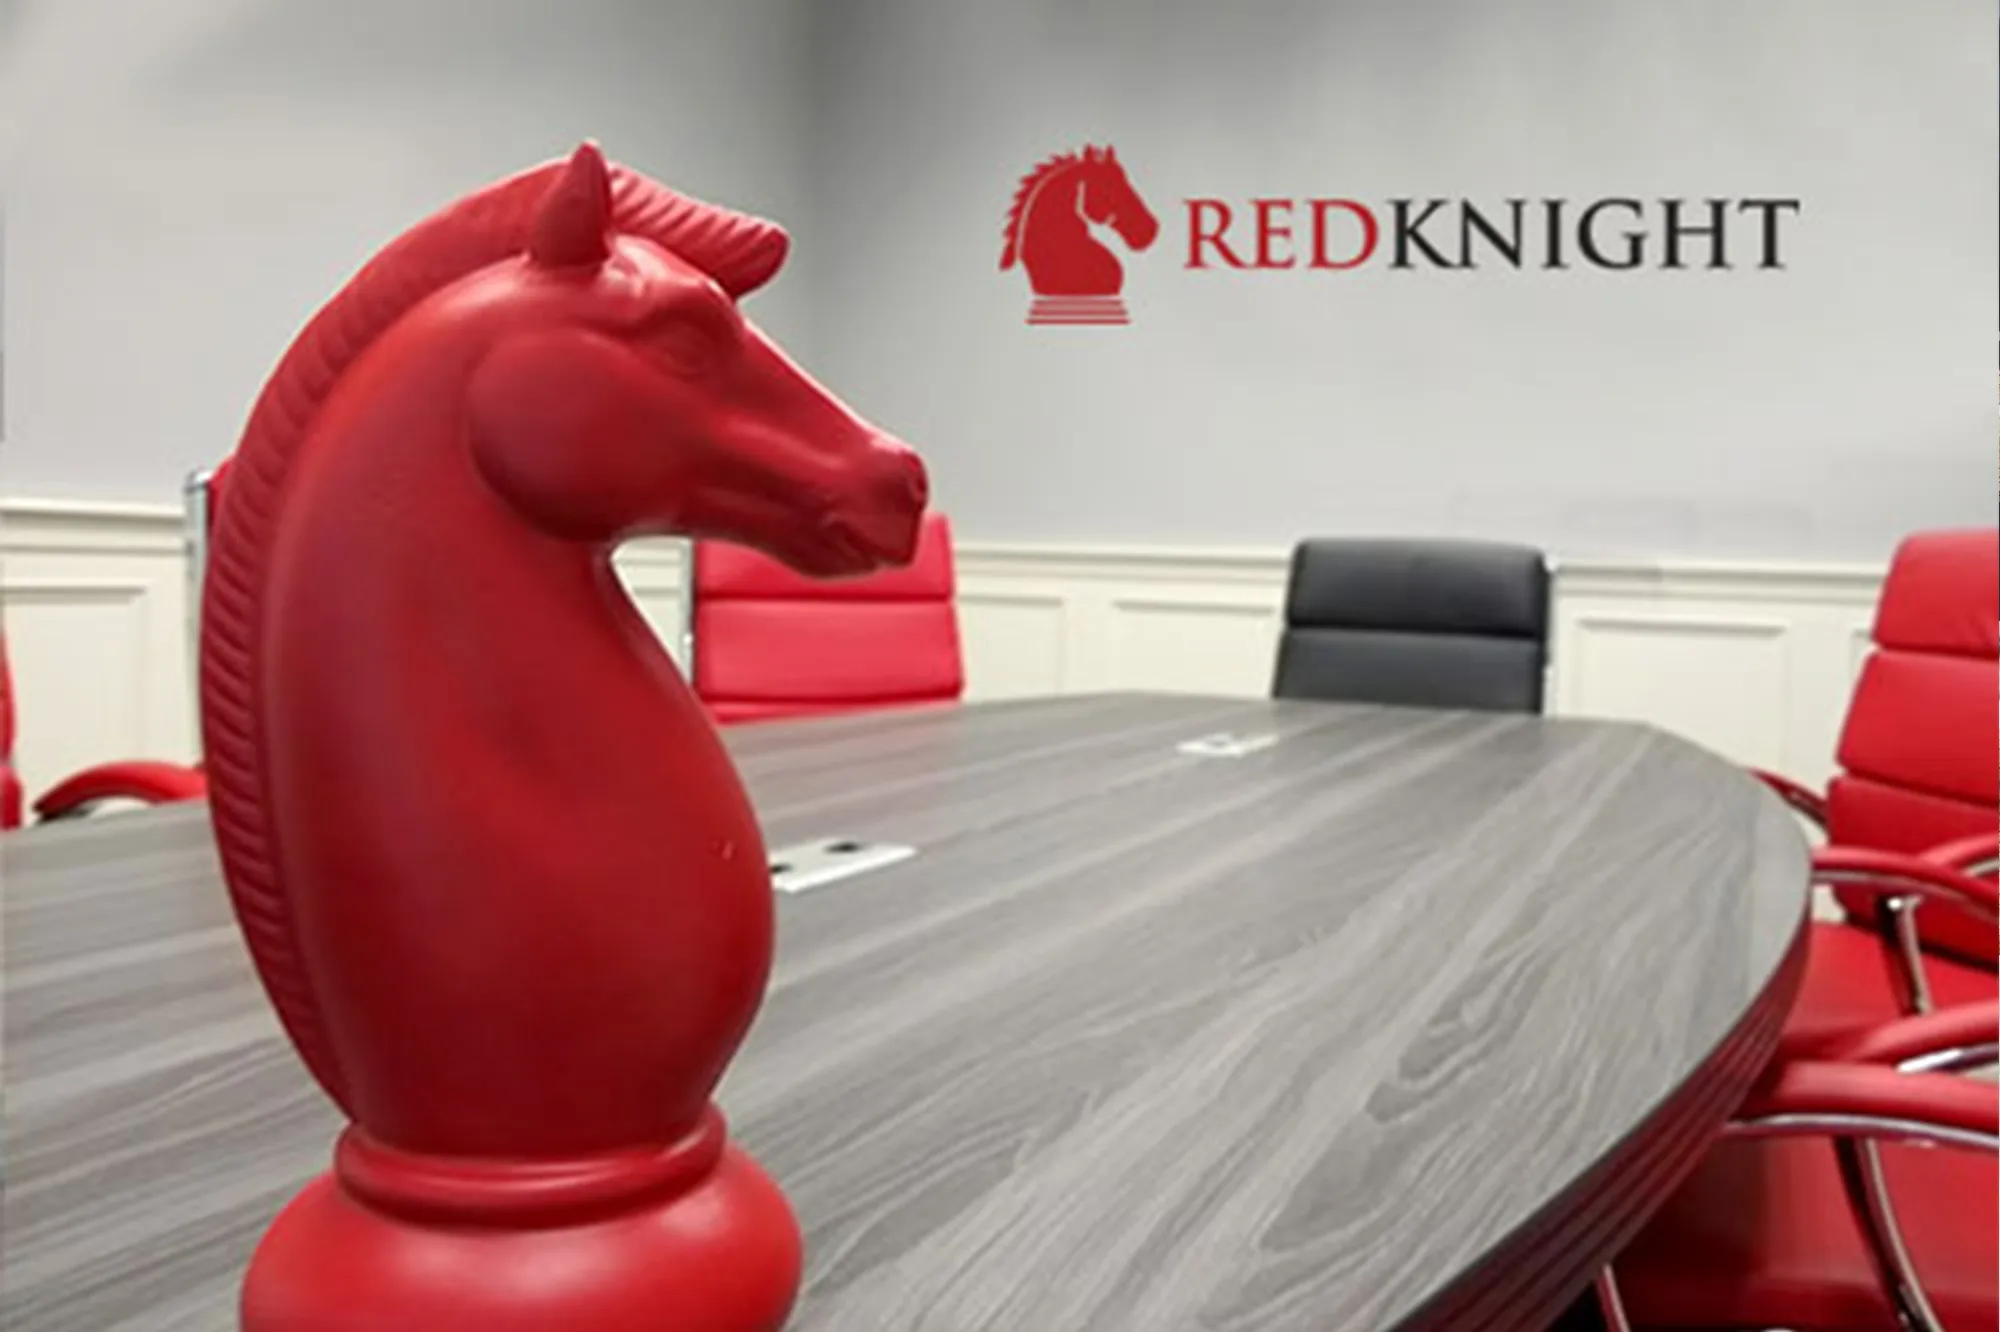 Real-life RedKnight horse on top of a meetings table